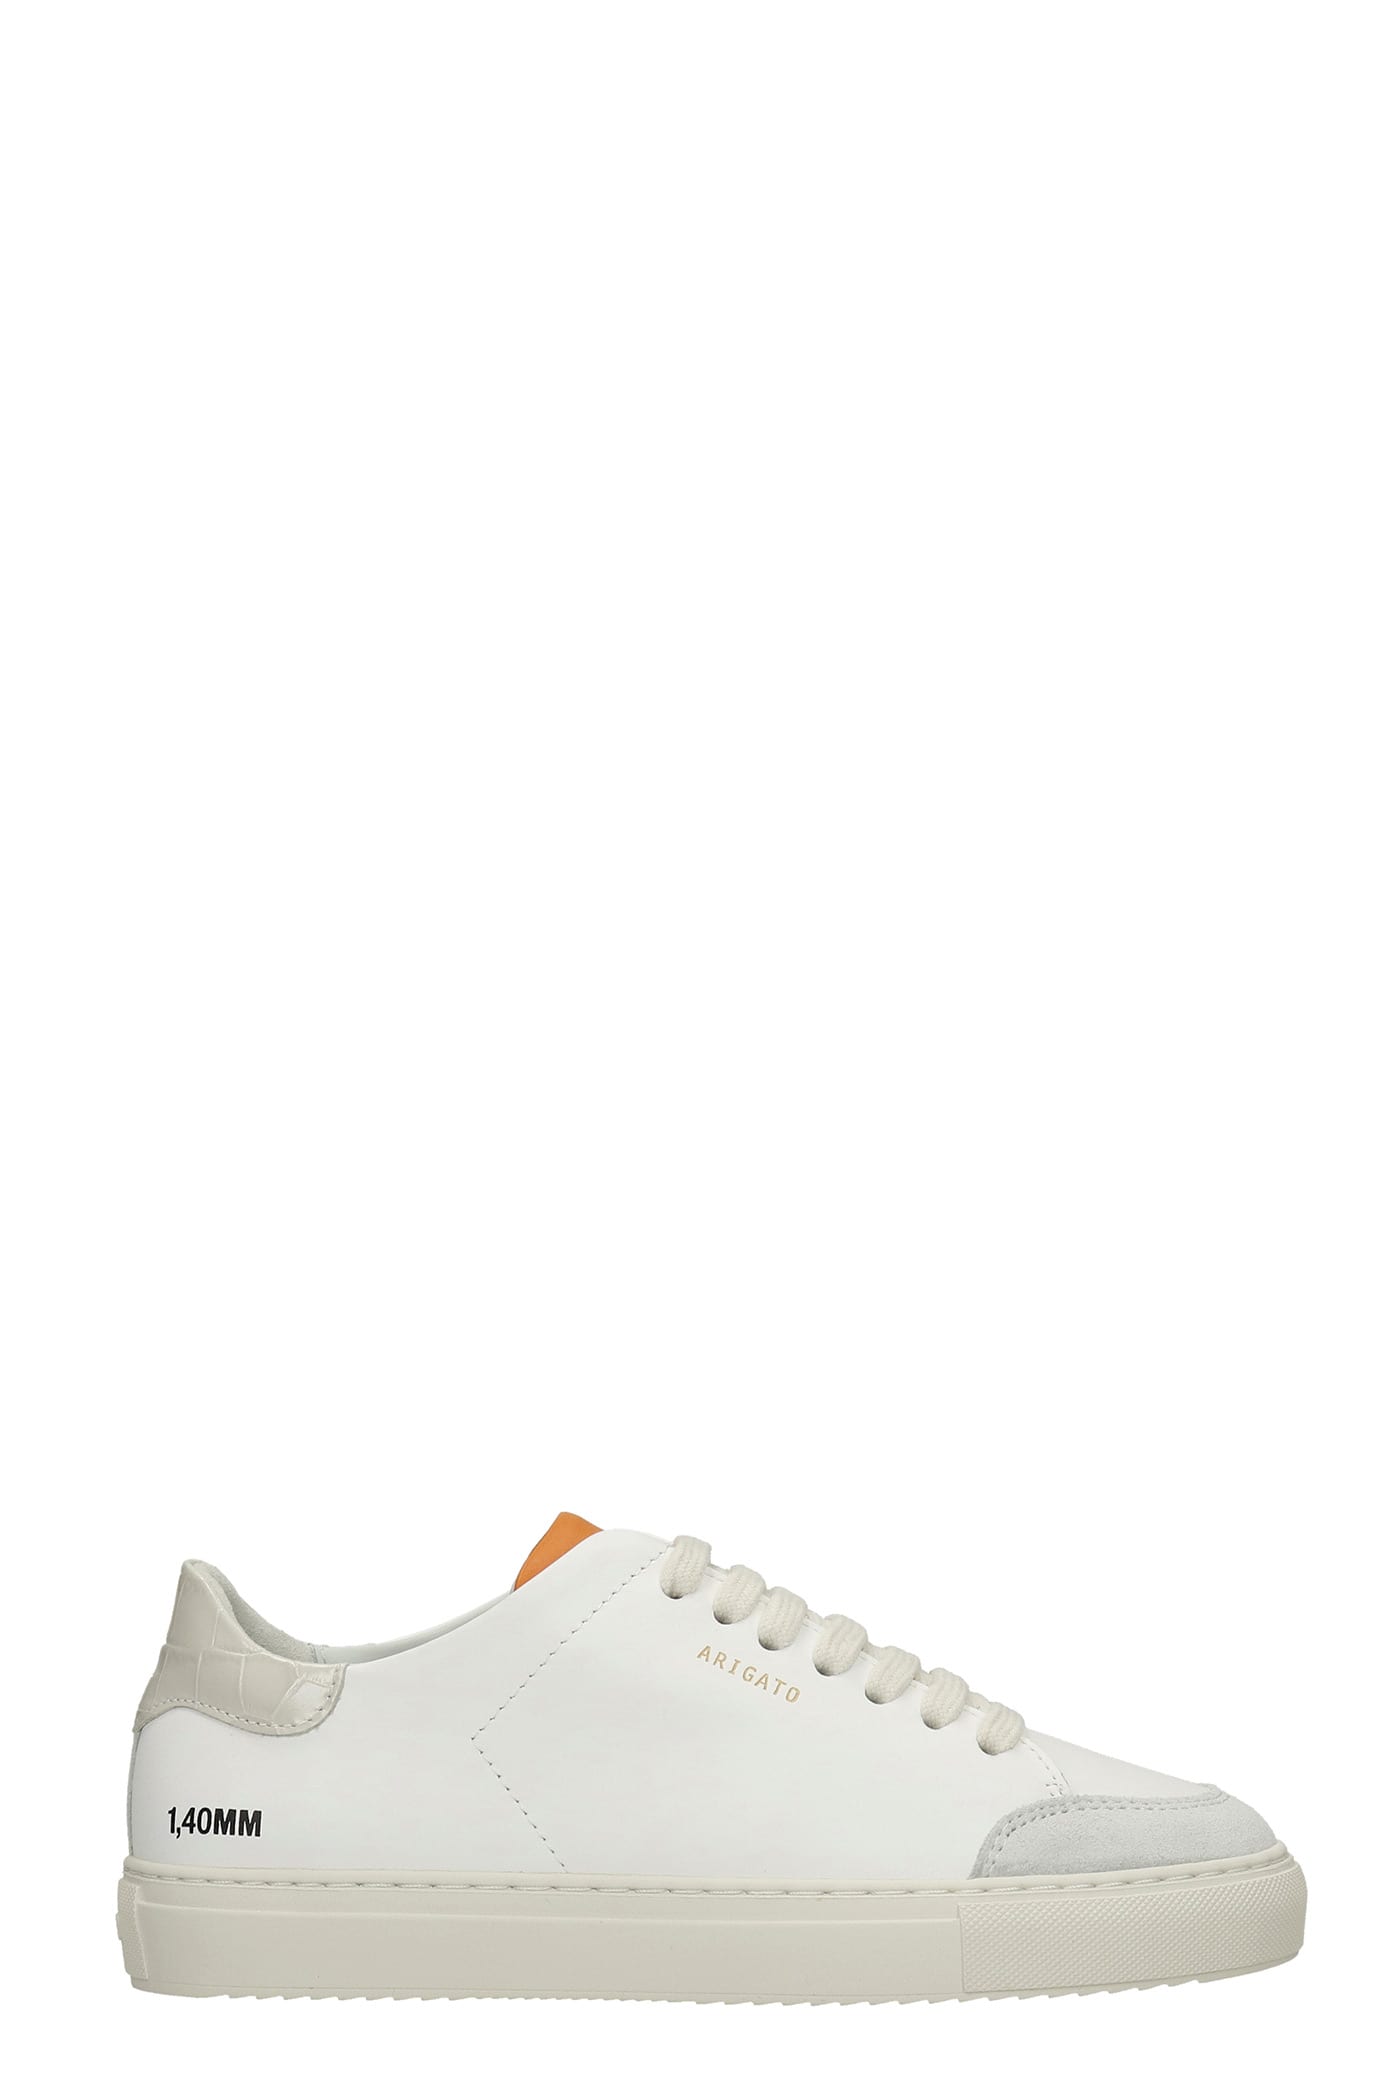 Axel Arigato Clean 90 Sneakers In White Suede And Leather